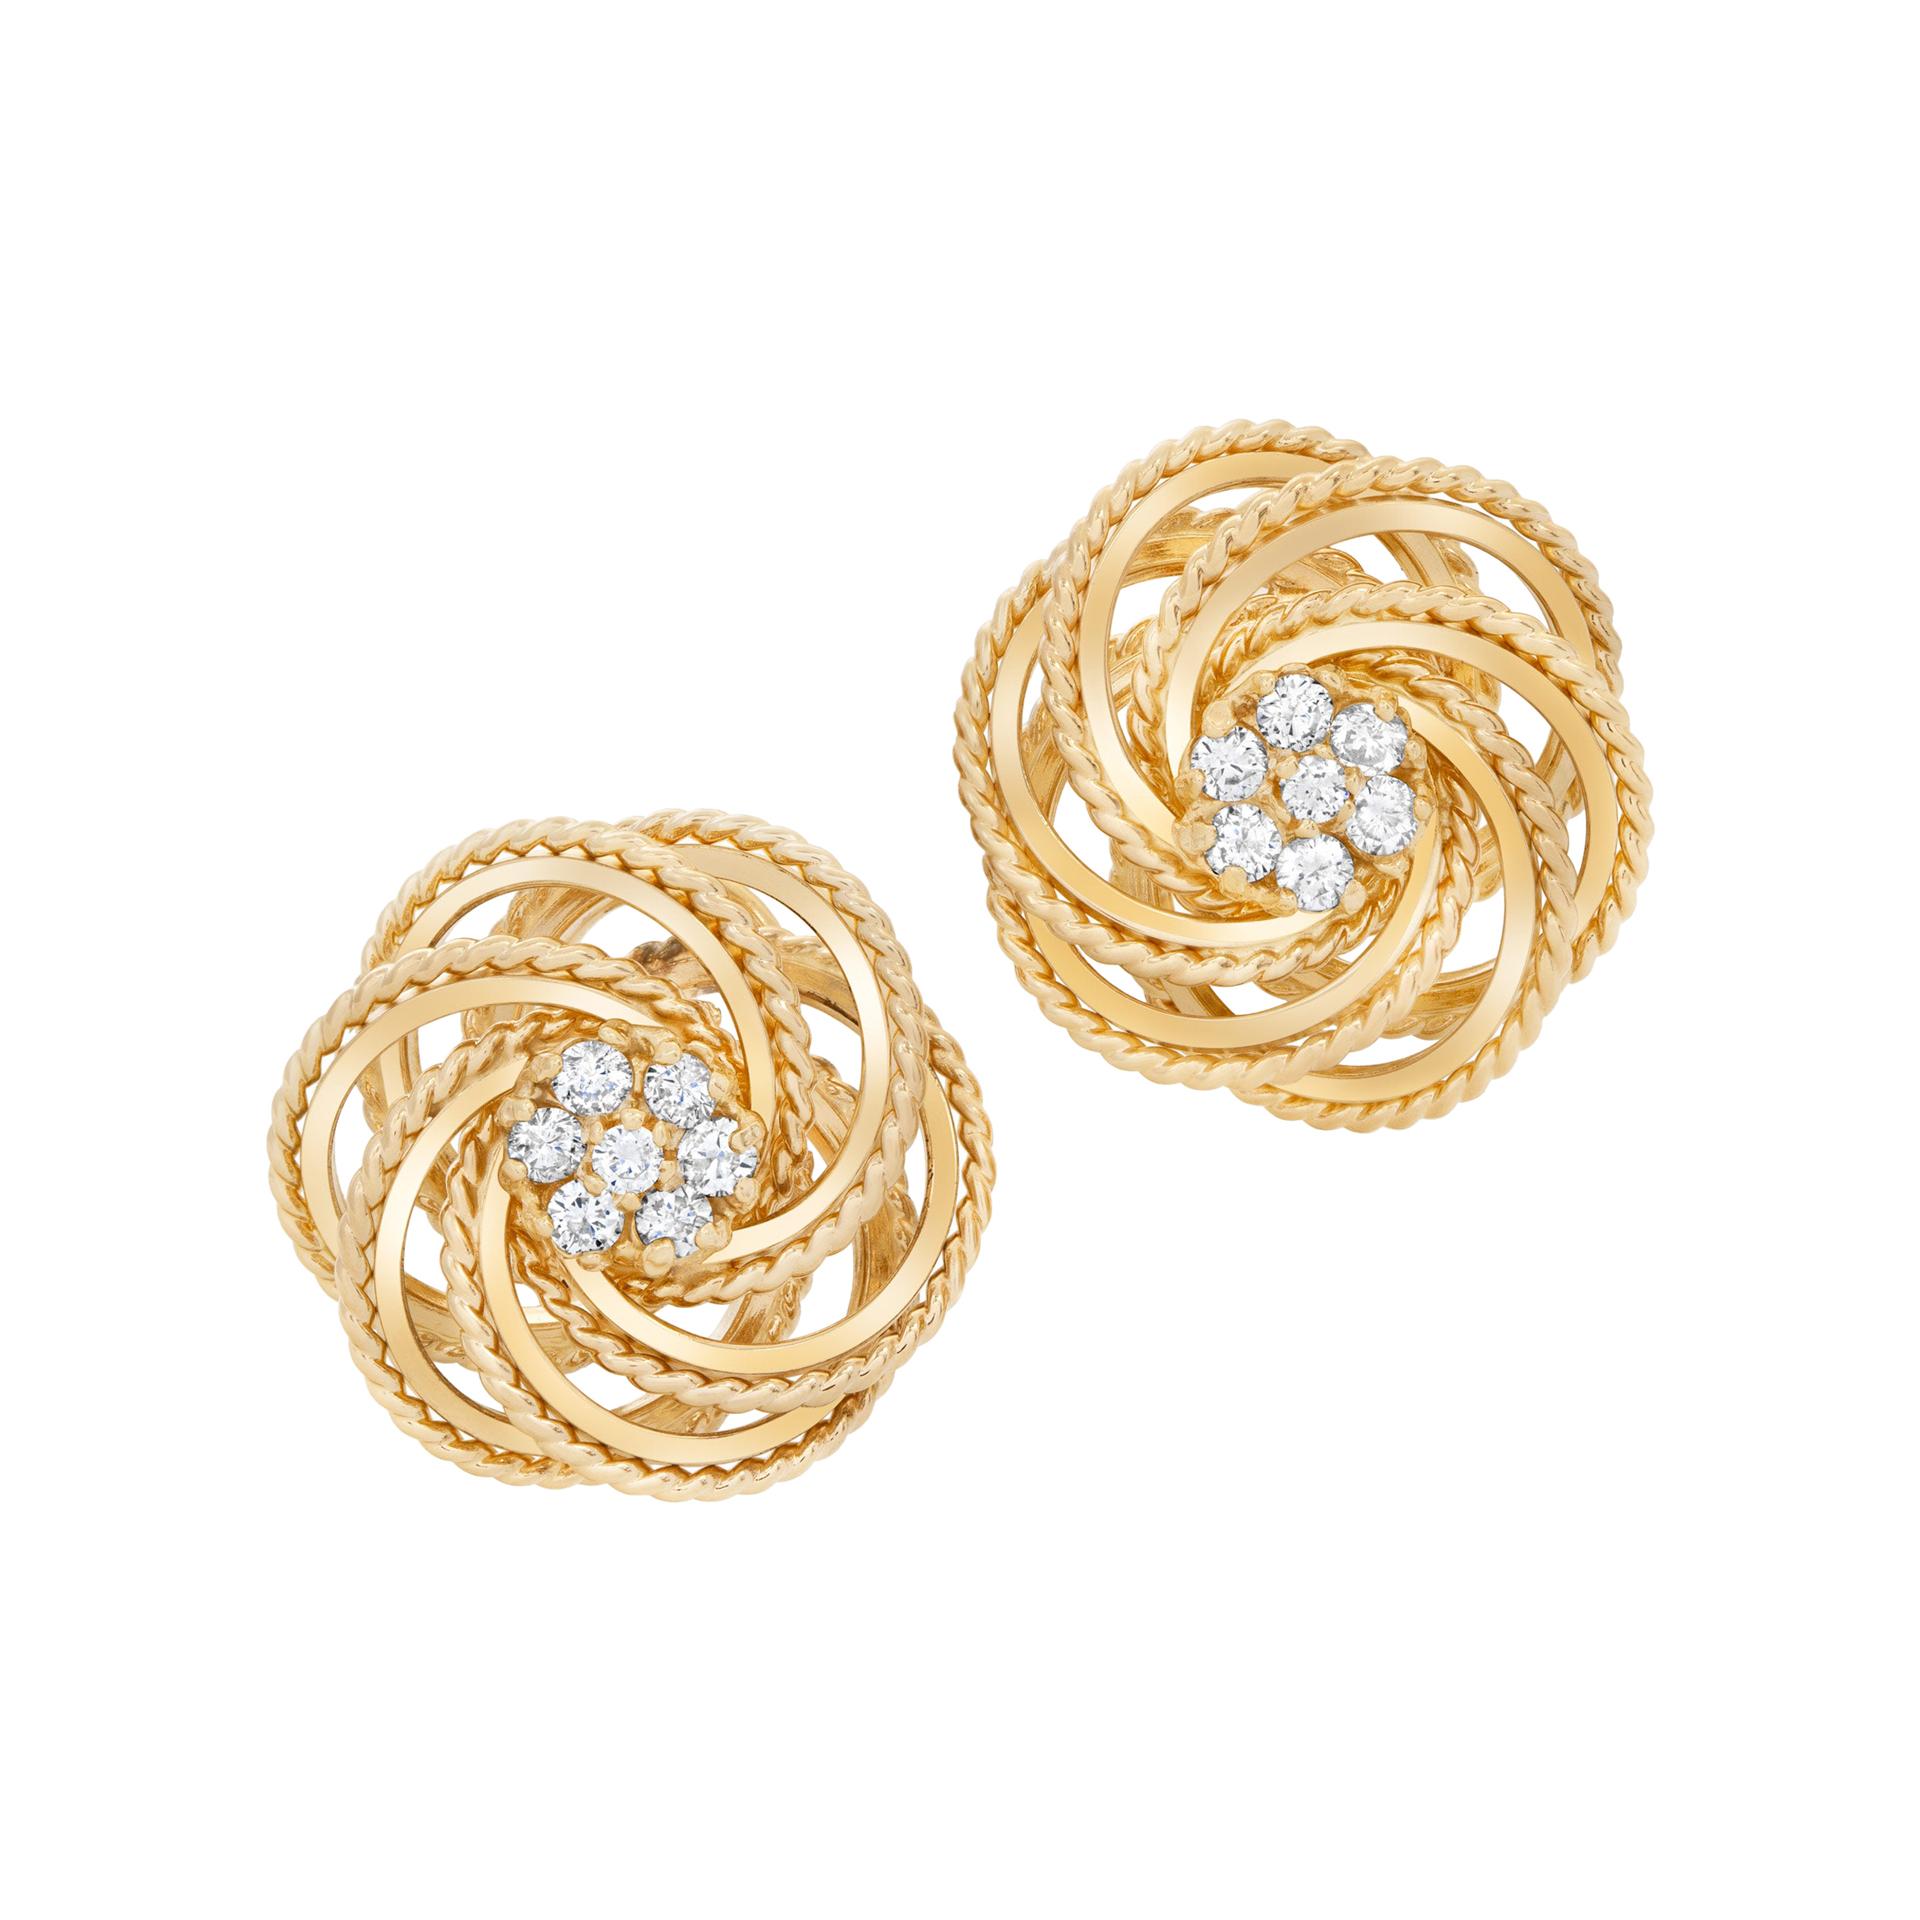 Diamond Knotted Earrings in 14k Yellow Gold